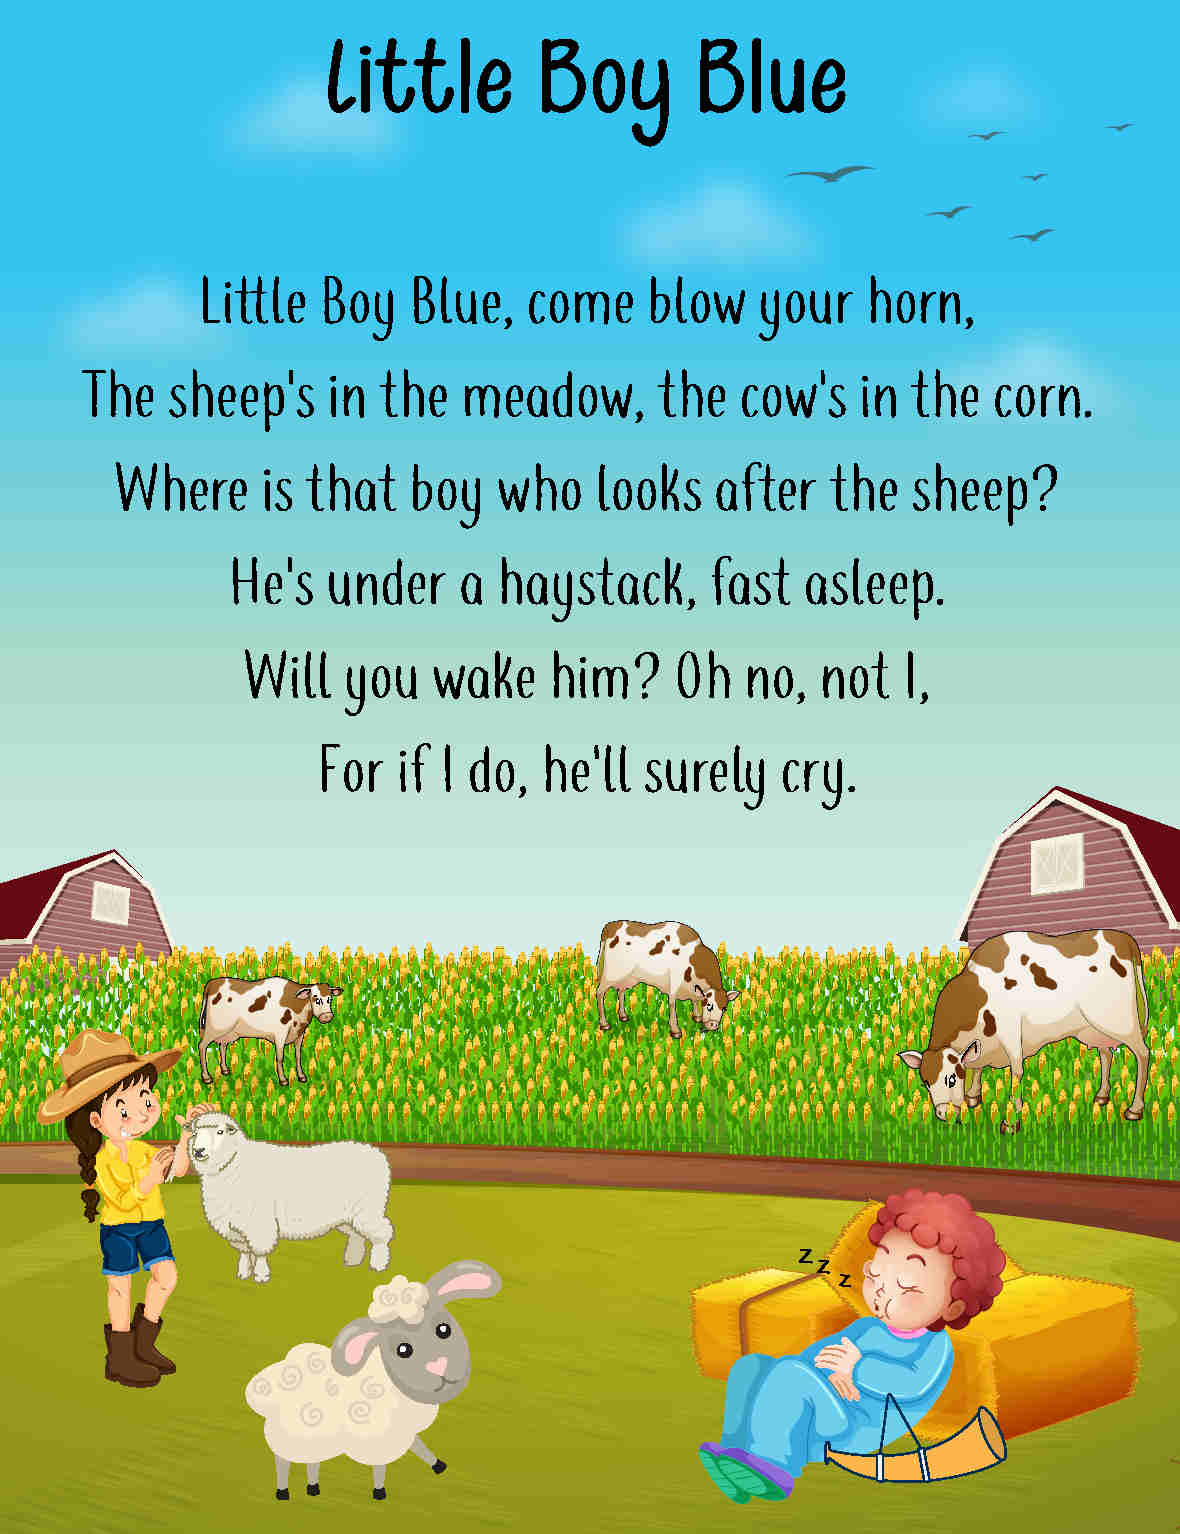 Nursery Rhyme Worksheets are an effective way to help students master the alphabet. These worksheets are designed to provide students with a fun and engaging way to Nursery Rhymes.